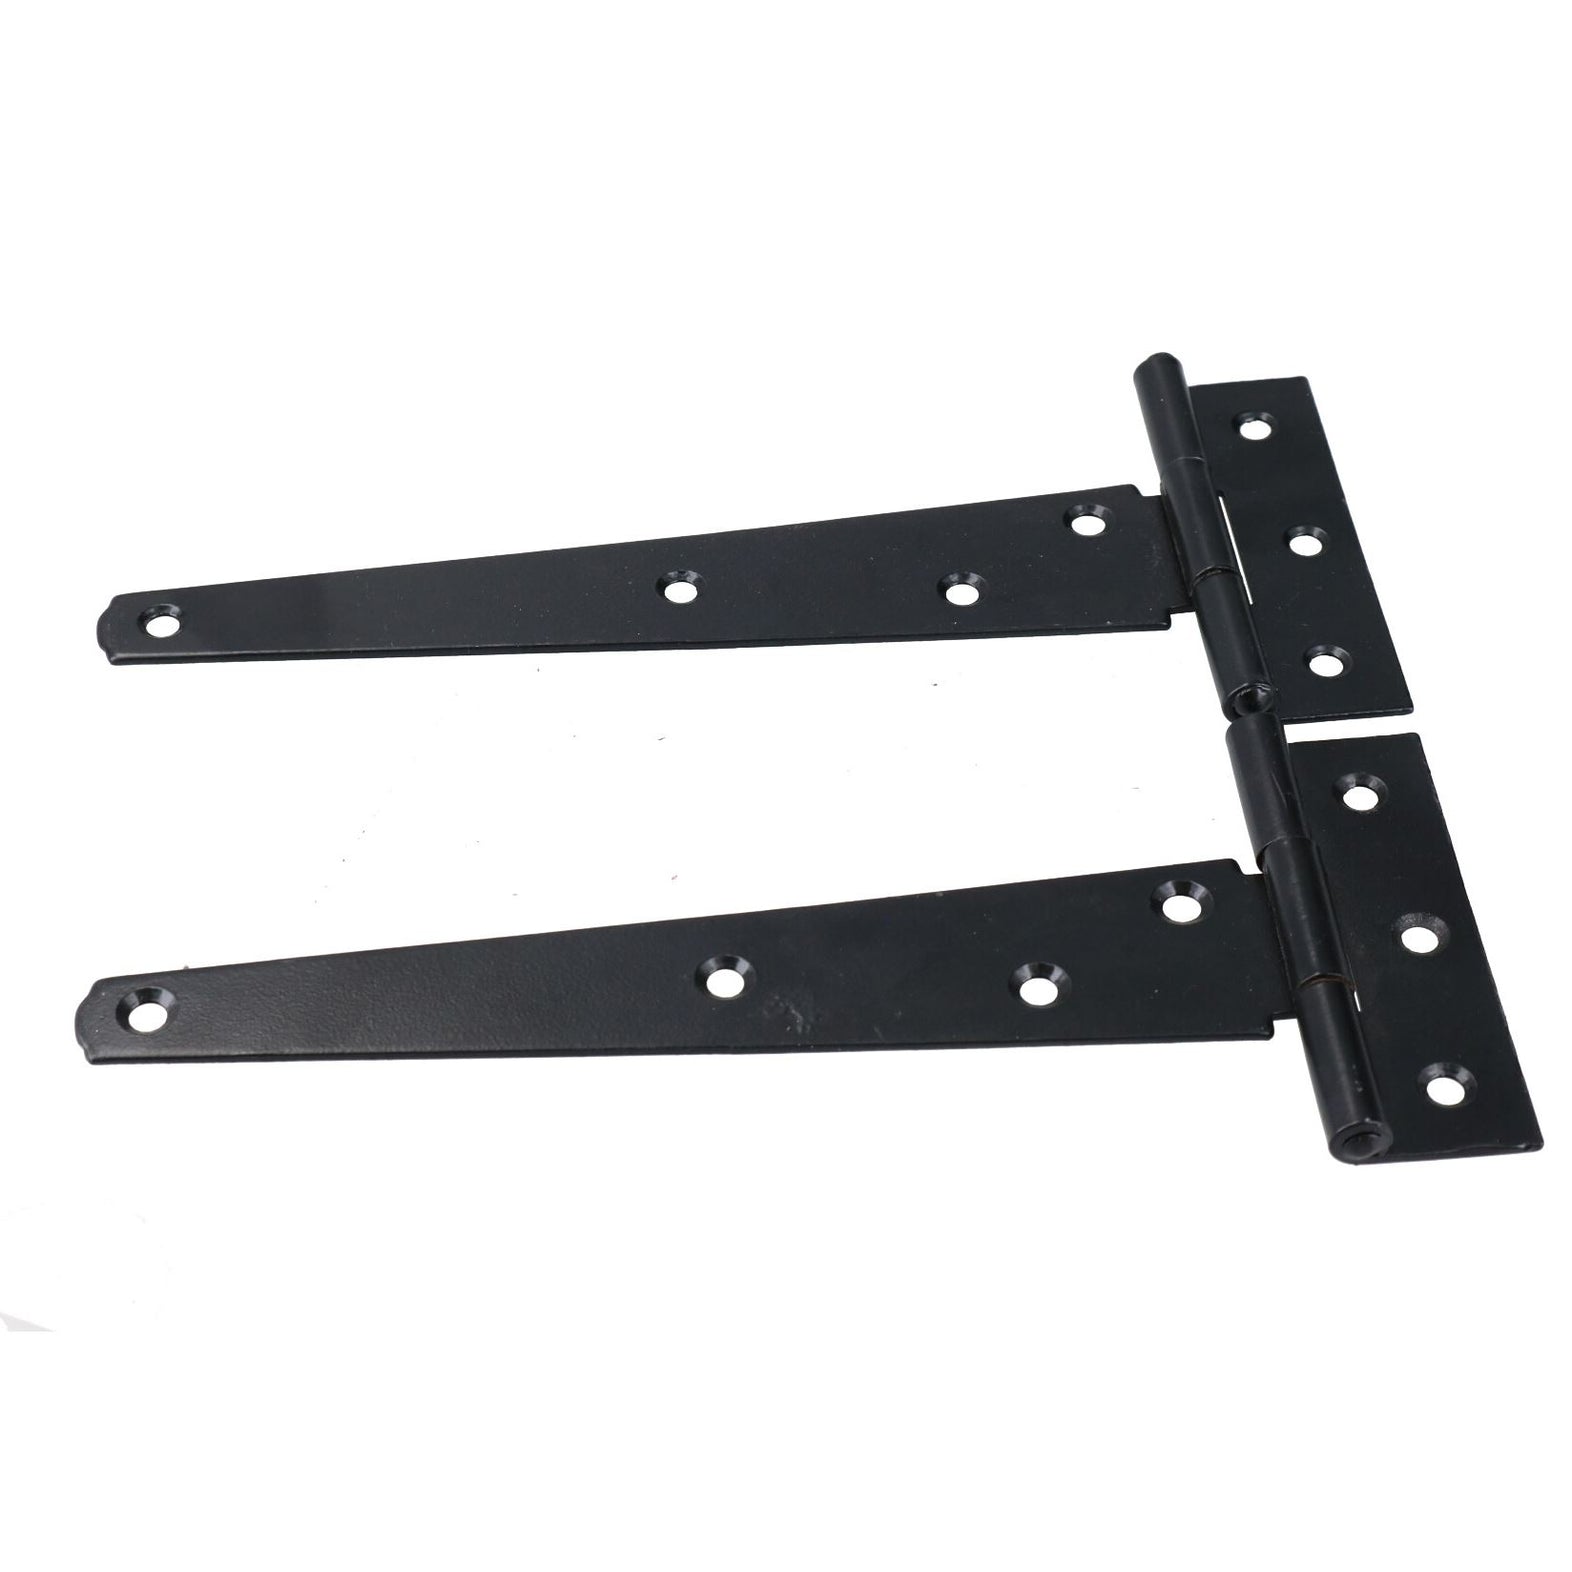 6" / 150mm Tee Hinges Shed Door Gate T Strap Hinge Pair With Fixings